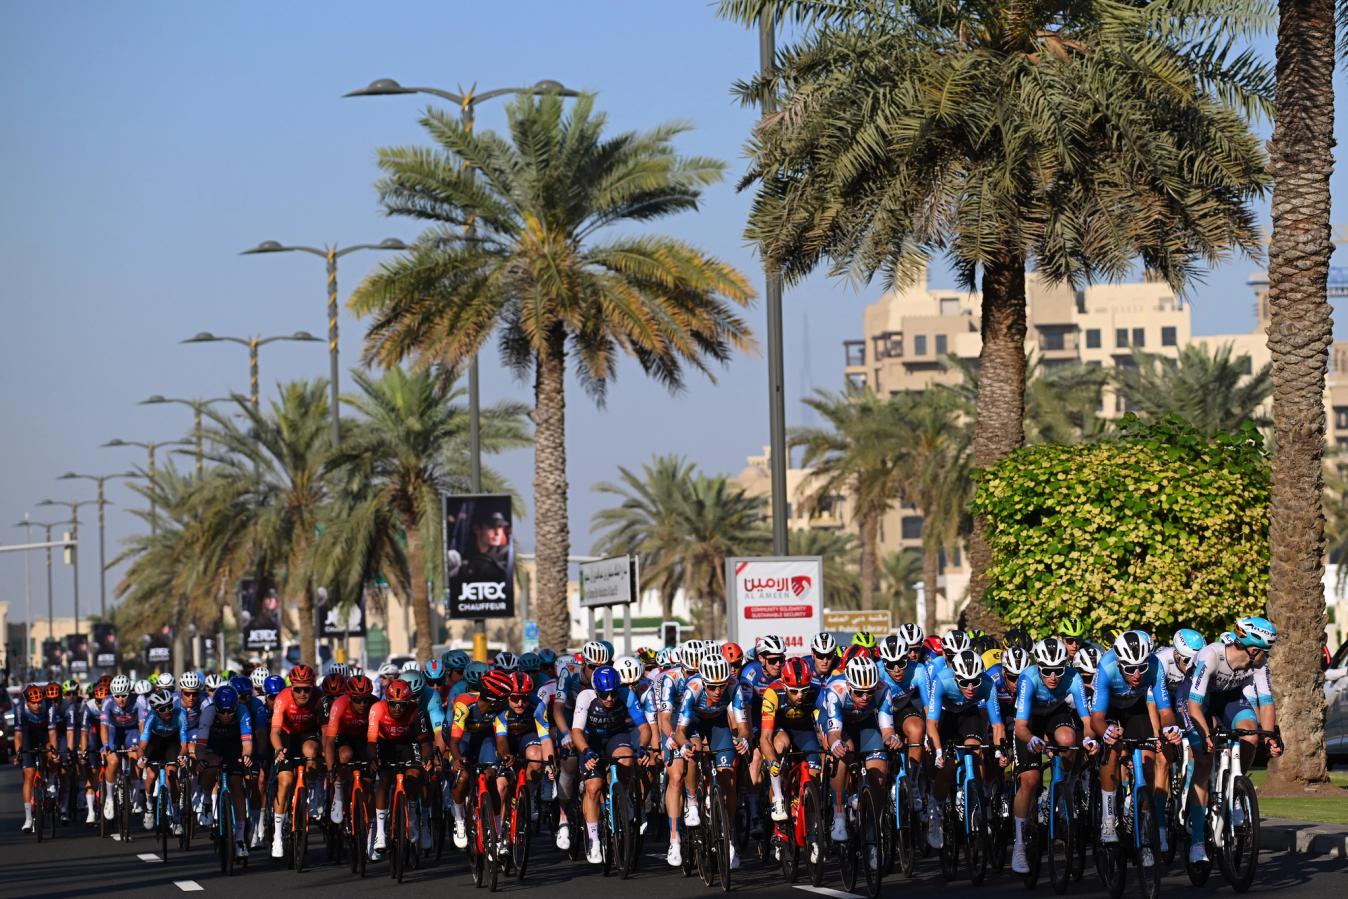 As the final 10km loom on the horizon, teams soon start to organise into well-drilled trains at the UAE Tour